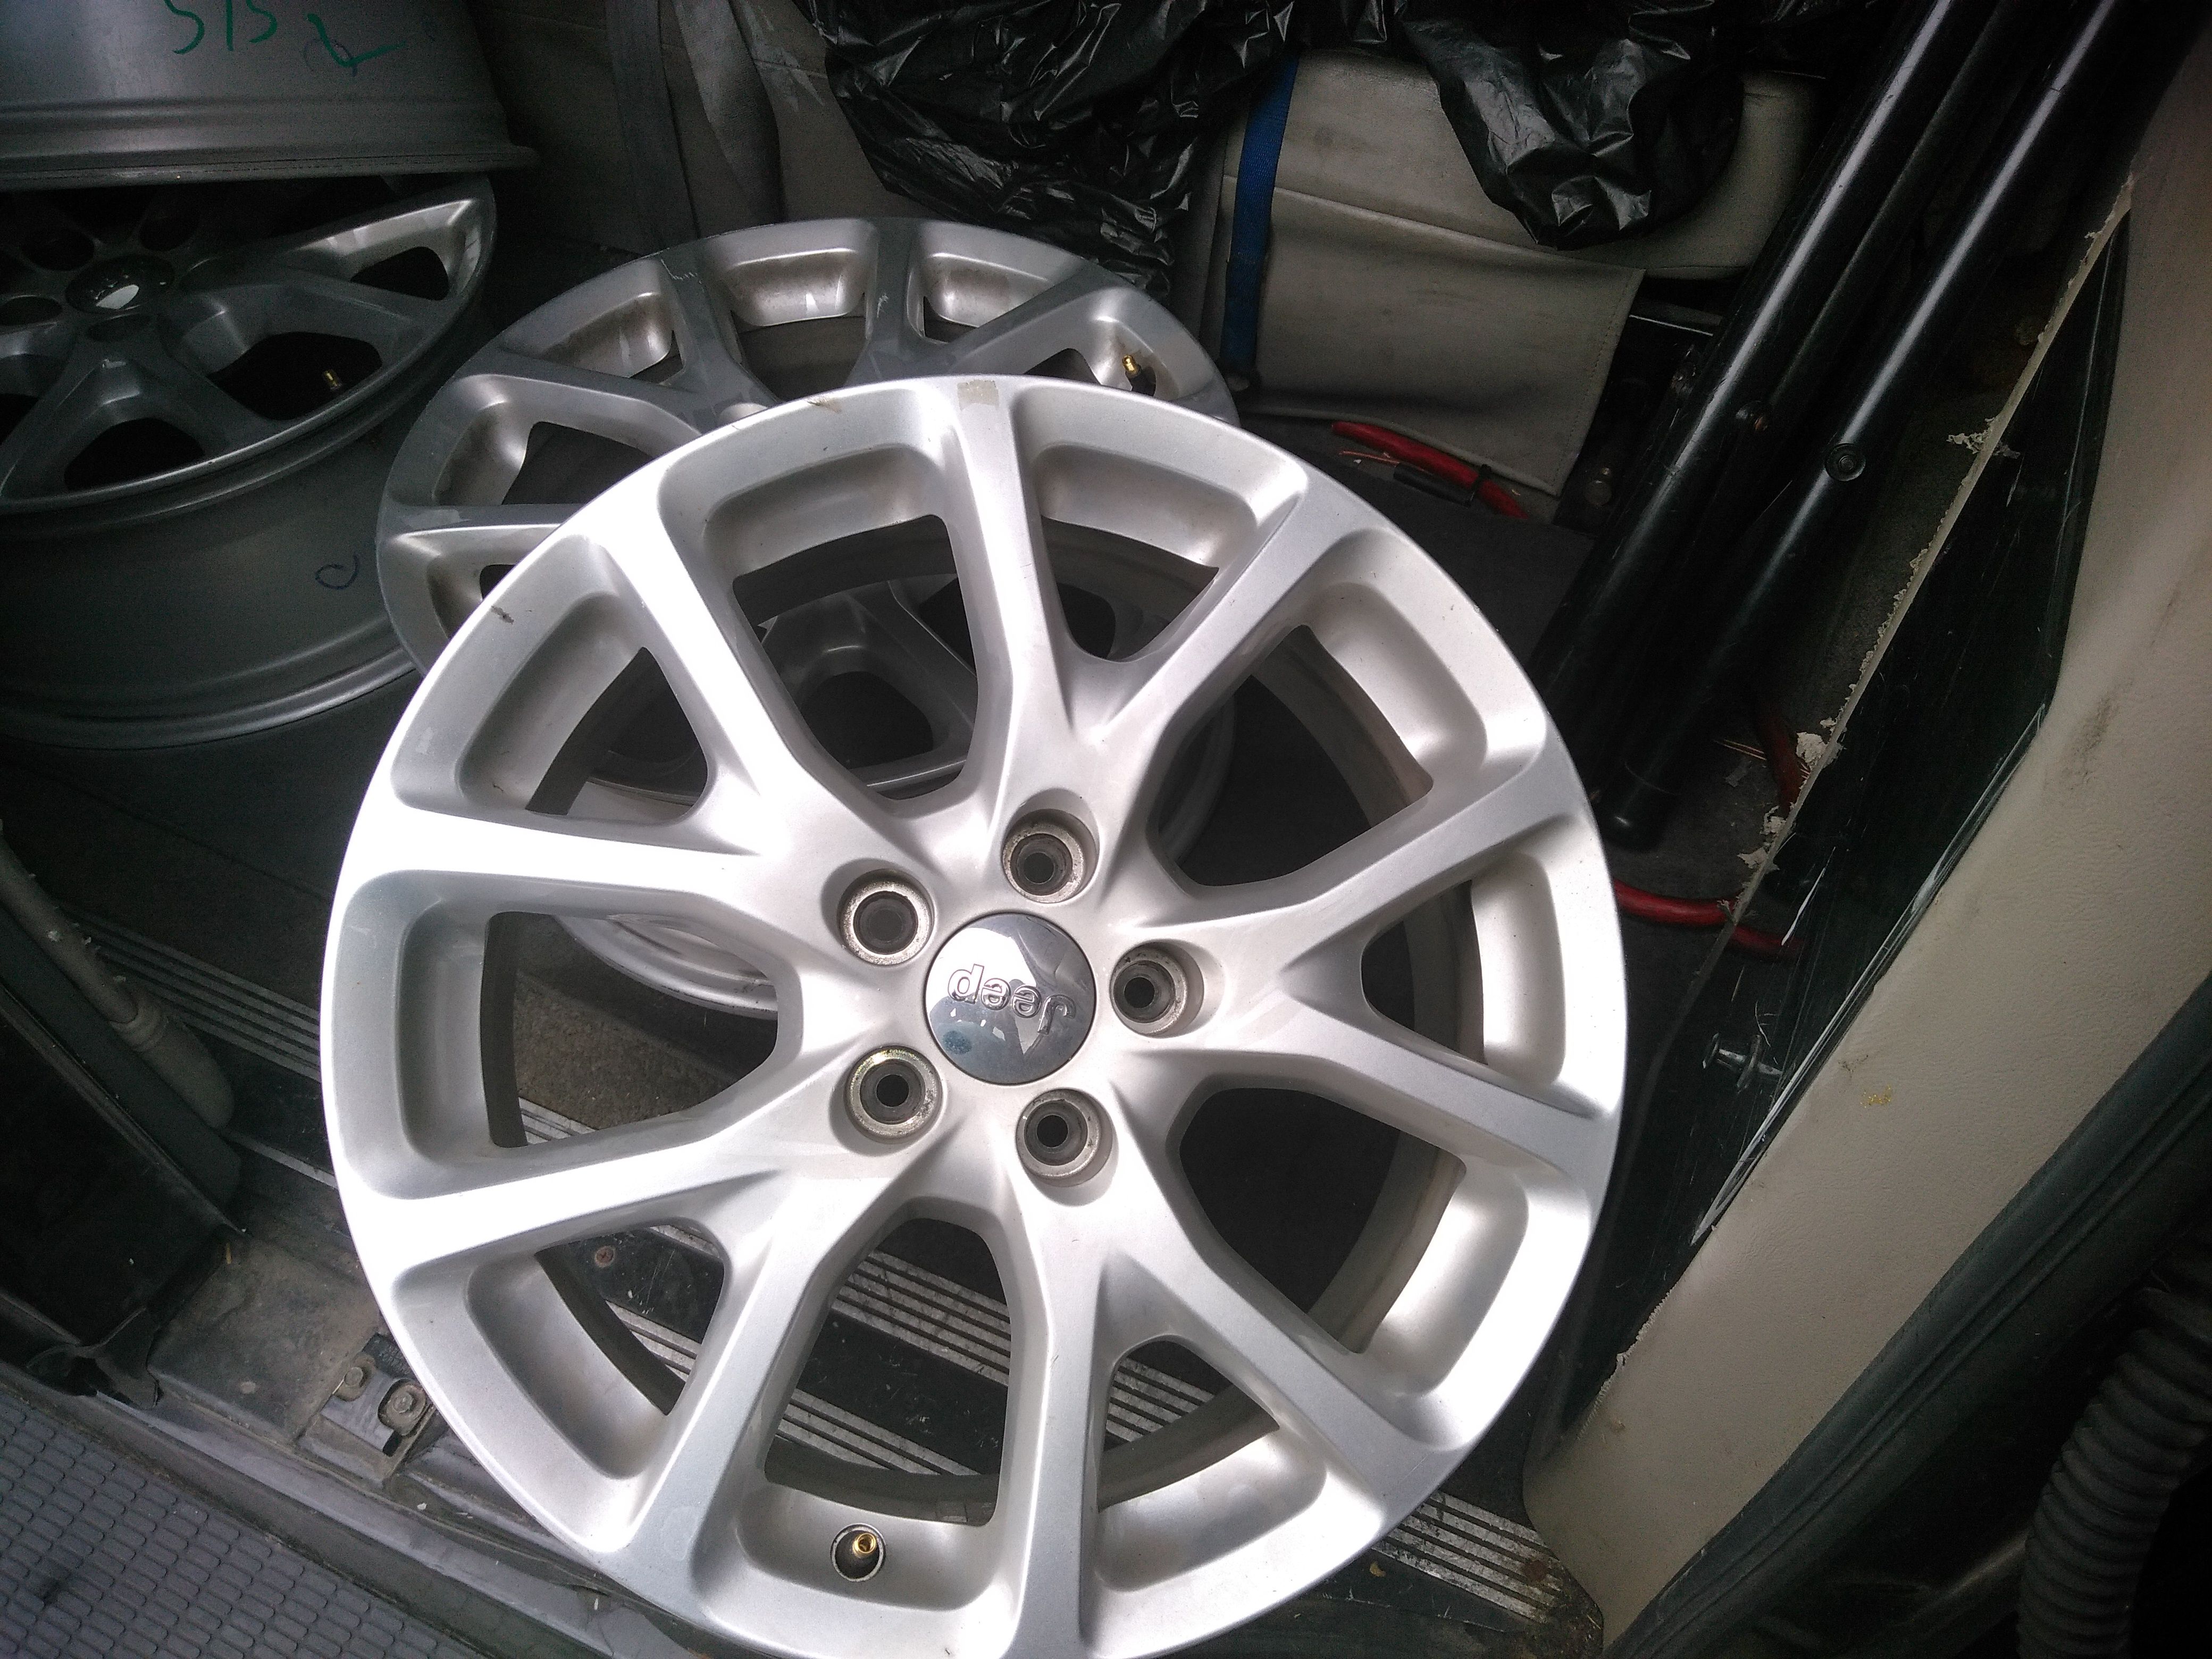 4 17in Jeep lattitude rims for sale asking $300 basically brand-new.